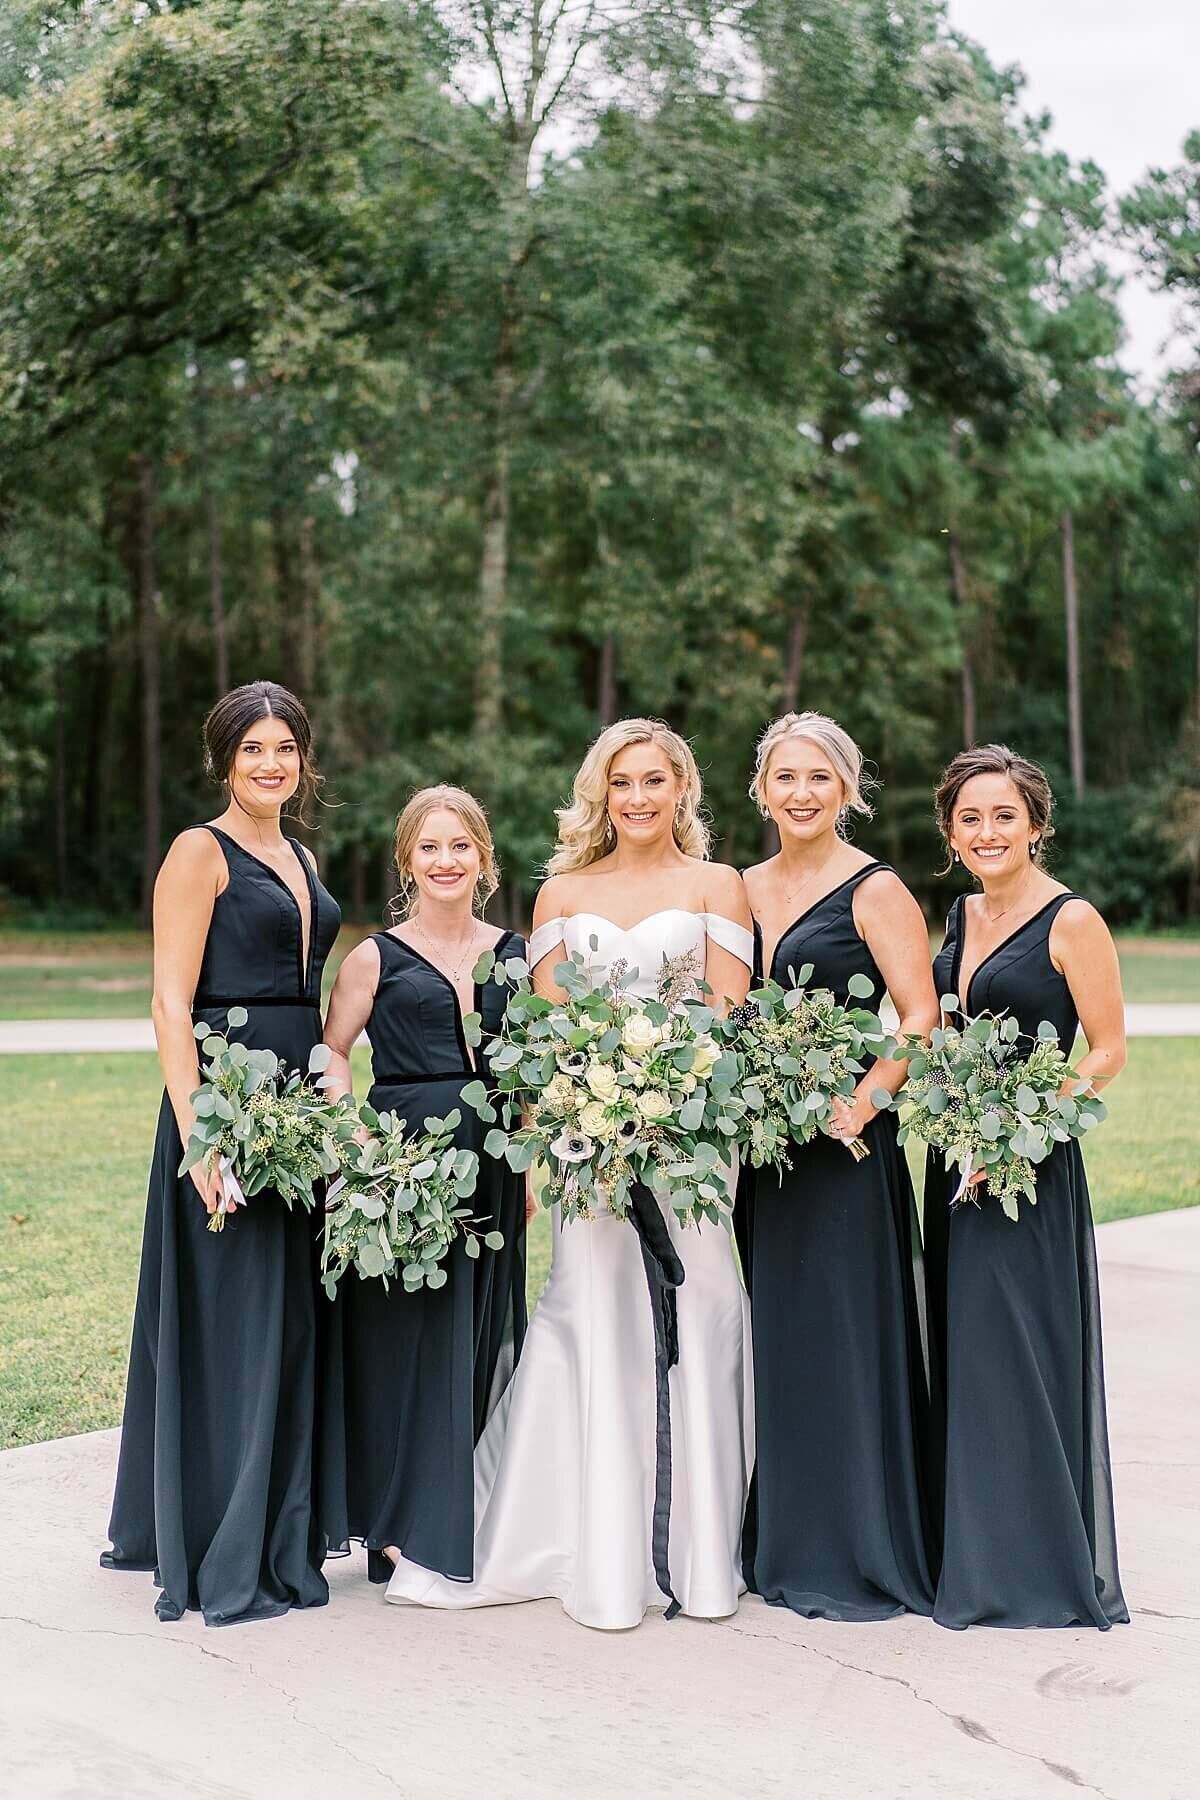 Bridal party portraits at black tie wedding at the Annex photographed by Alicia Yarrish Photography